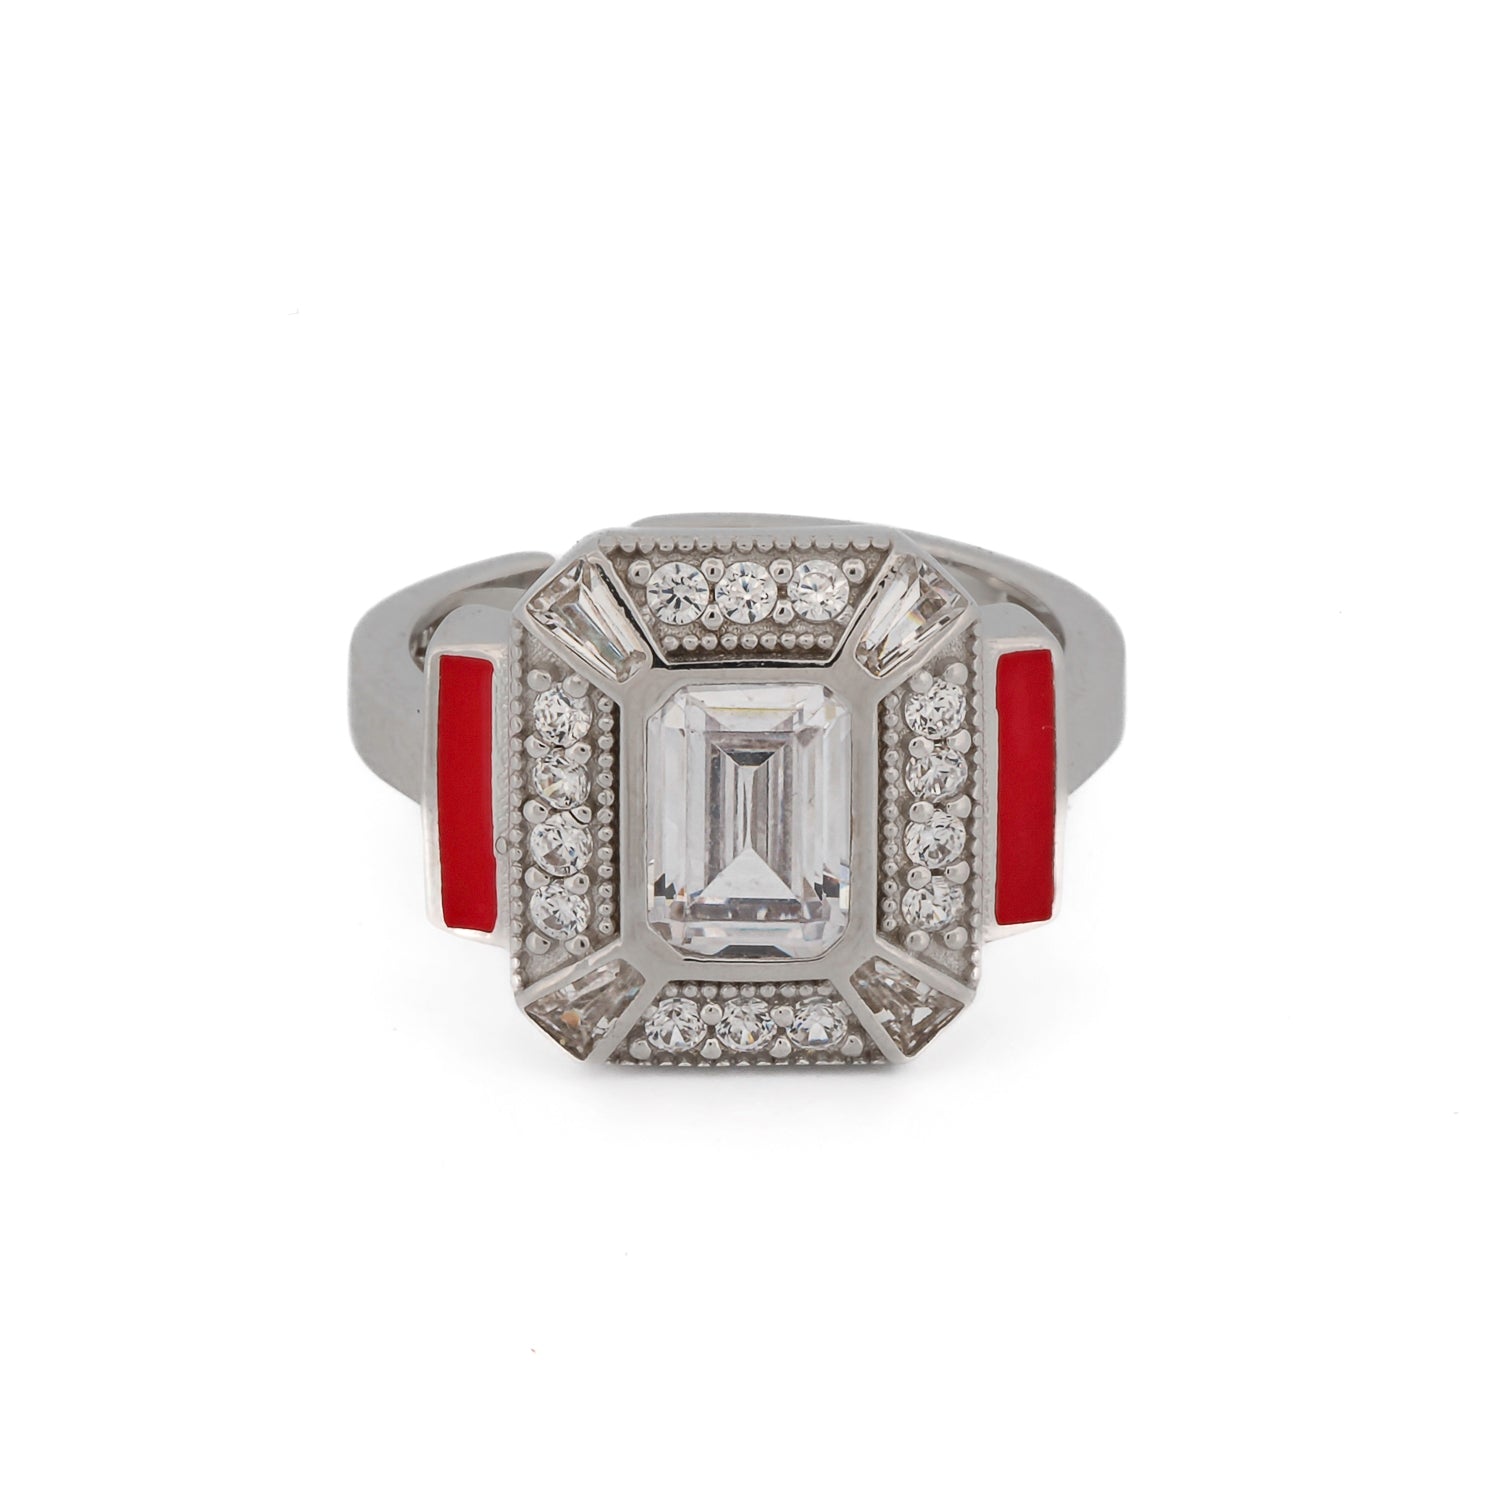 Stylish Sophistication: Pave Diamond & Red Enamel Sterling Silver Ring